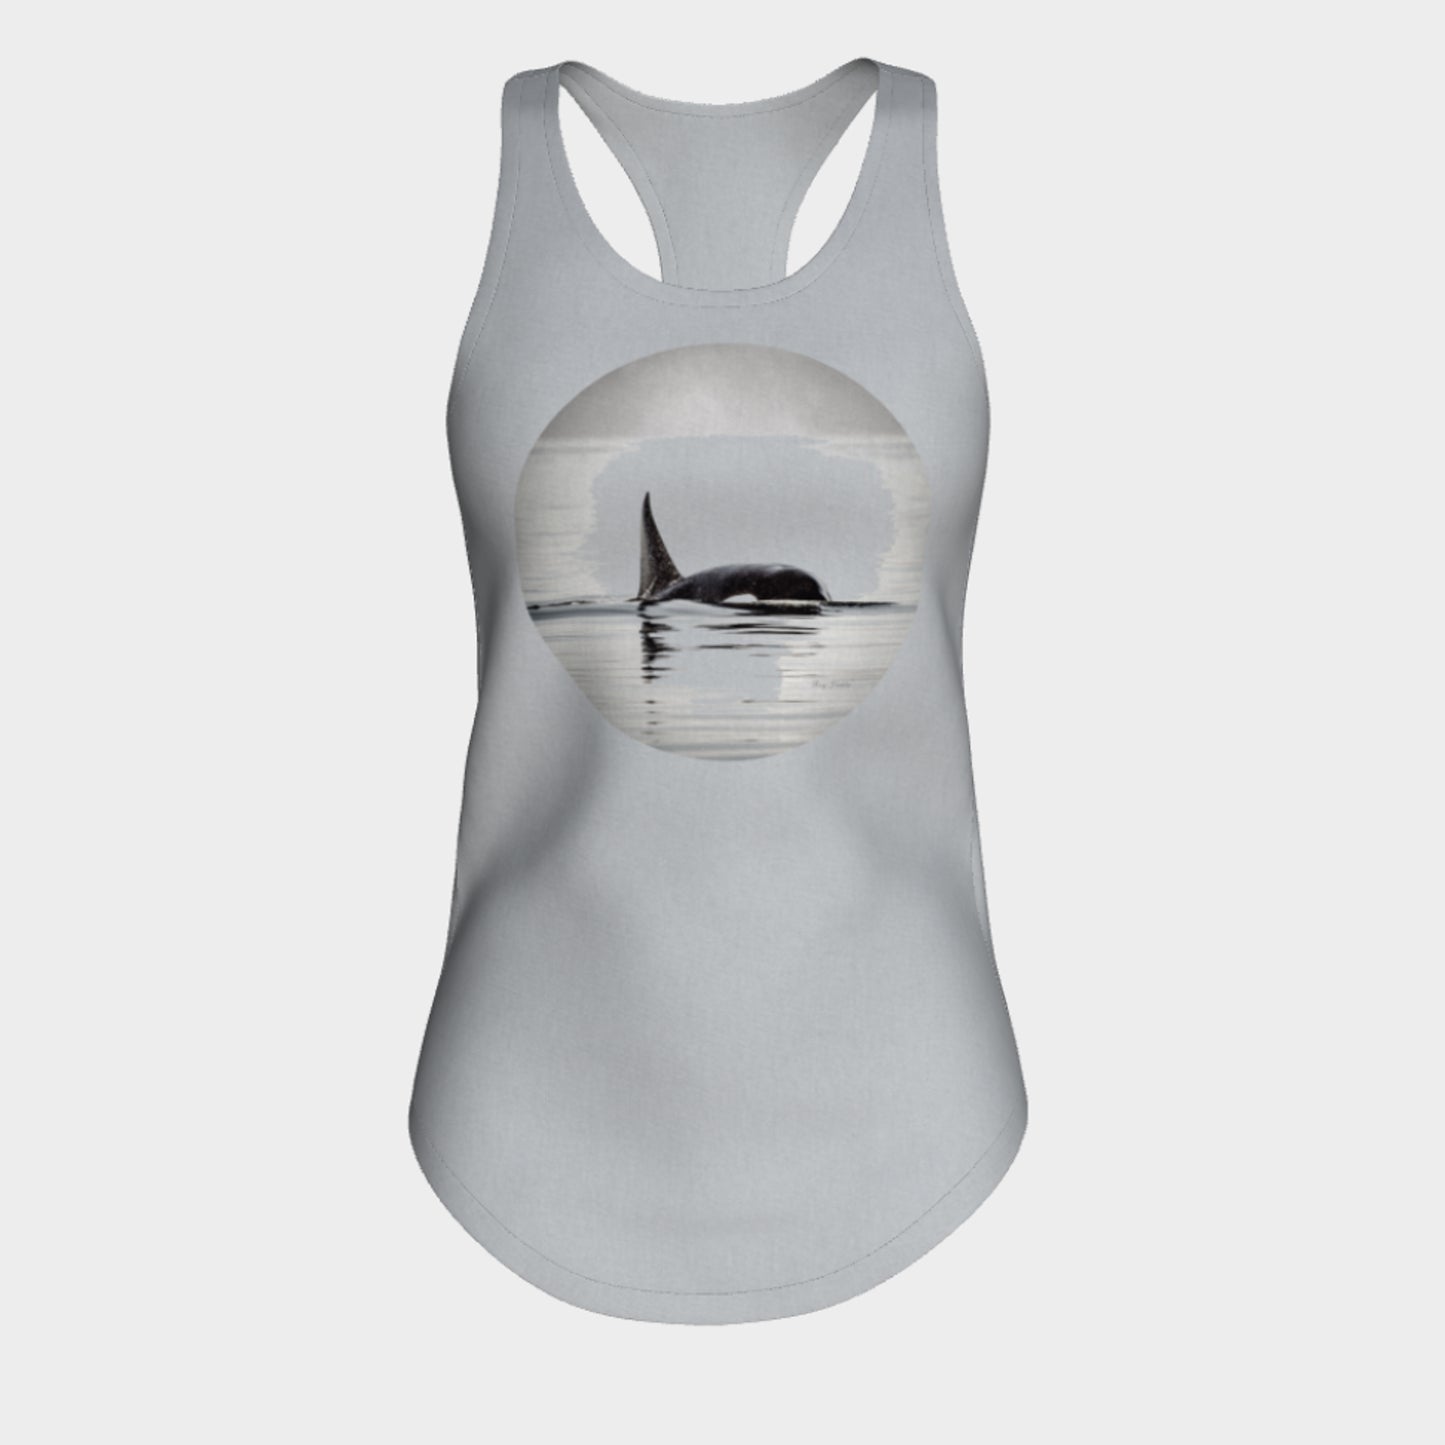 Orca Spray Racerback Tank Top  Excellent choice for the summer or for working out. 